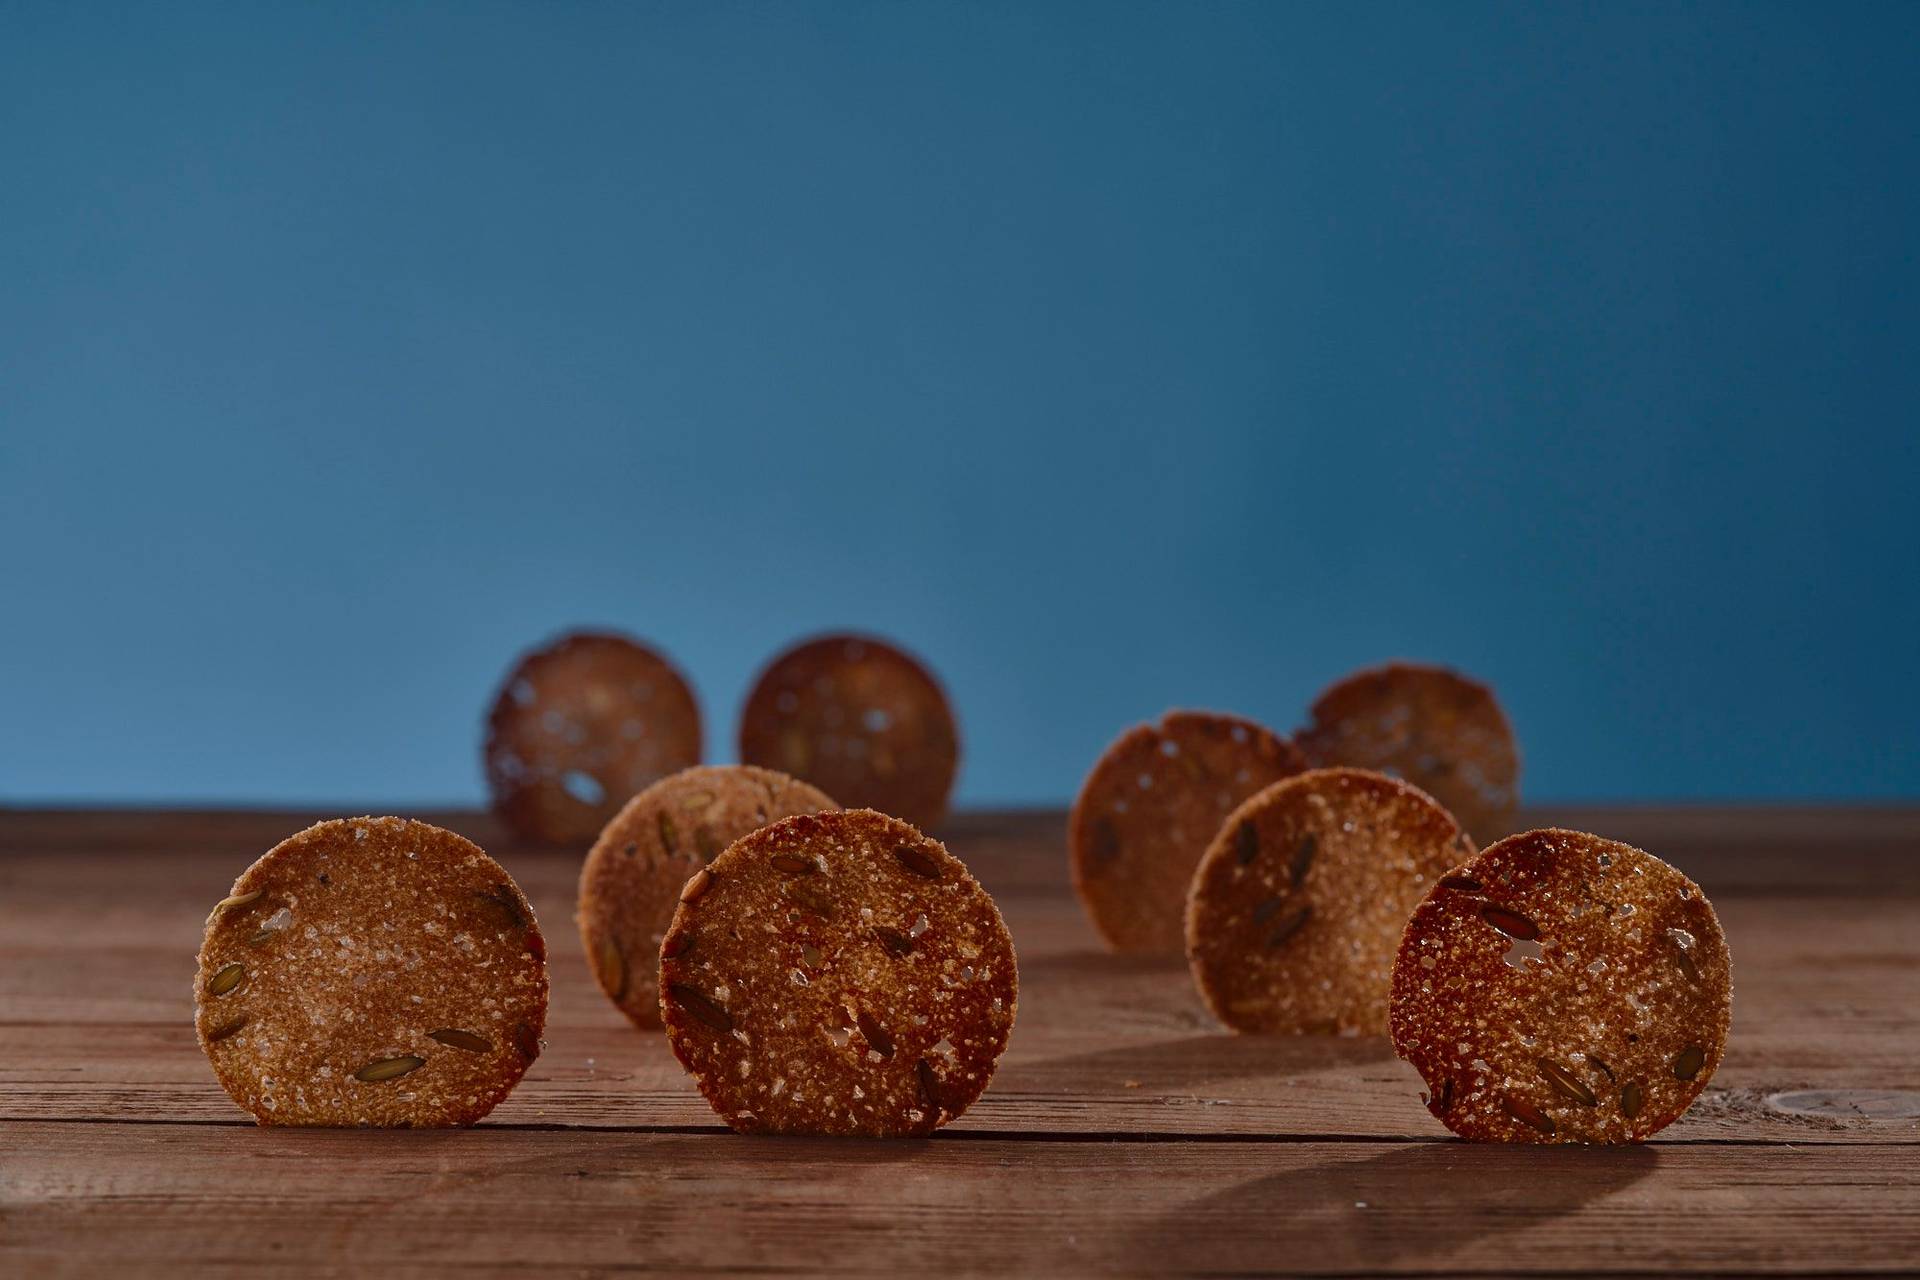 sourdough bread croutons on a wooden table with blue background